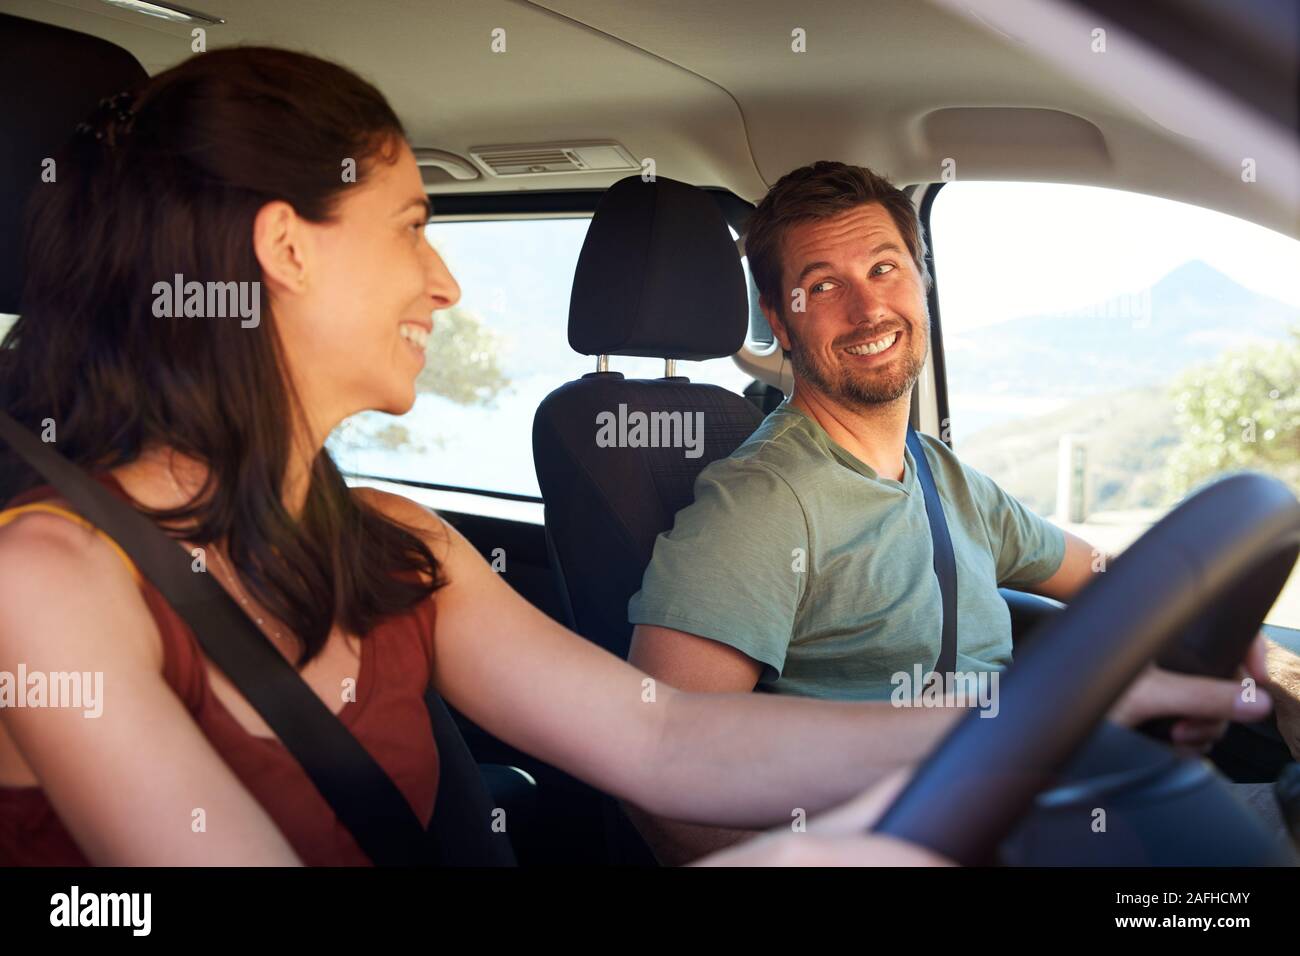 Mid adult white woman driving car, smiling to her husband in the front passenger seat, side view Stock Photo